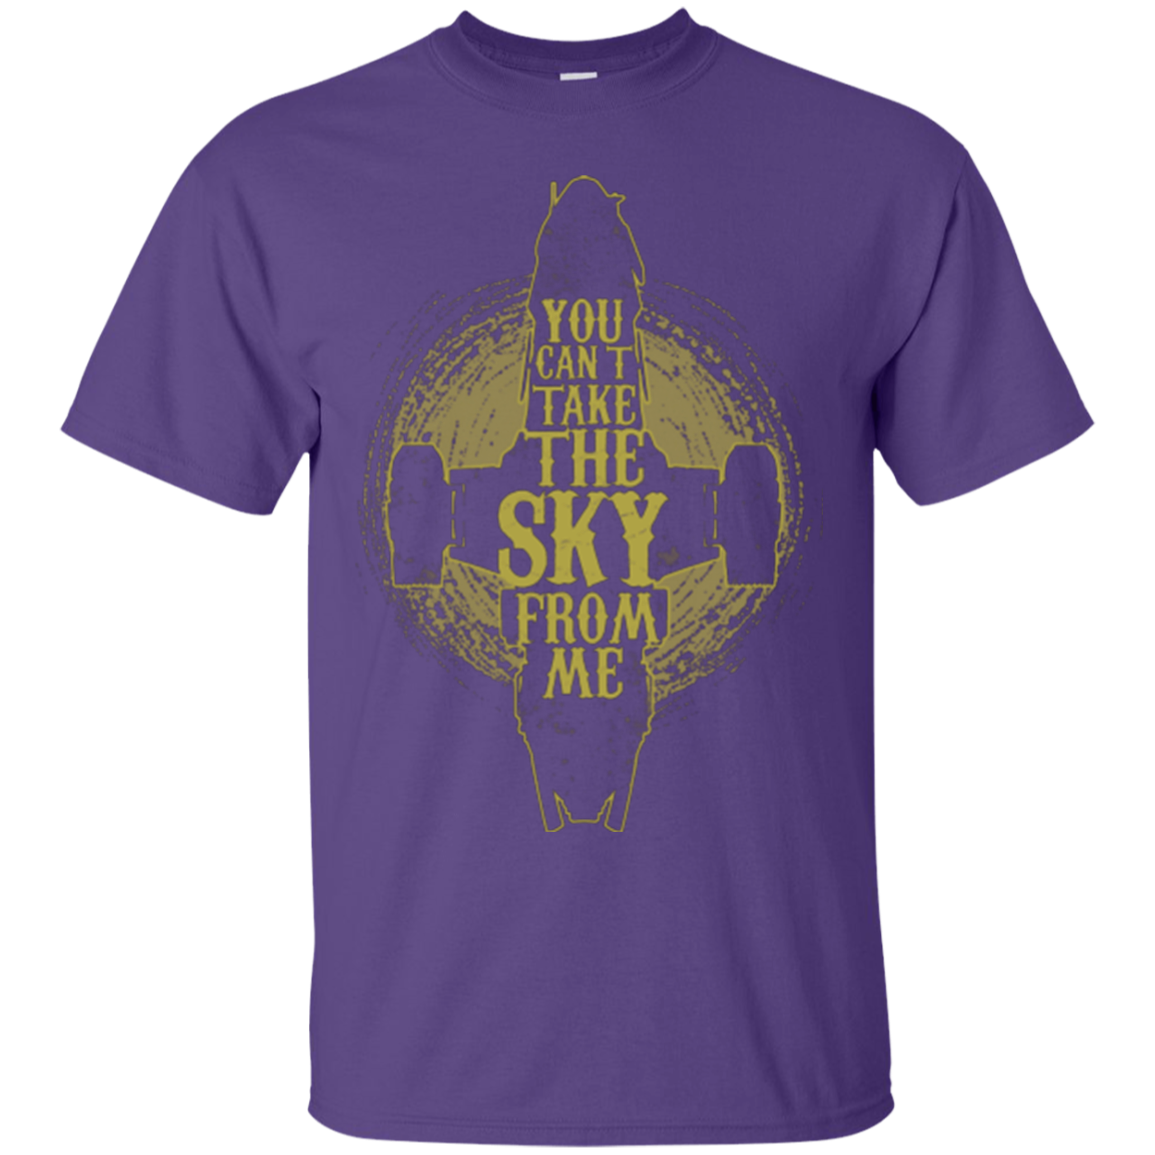 Can't take the sky T-Shirt